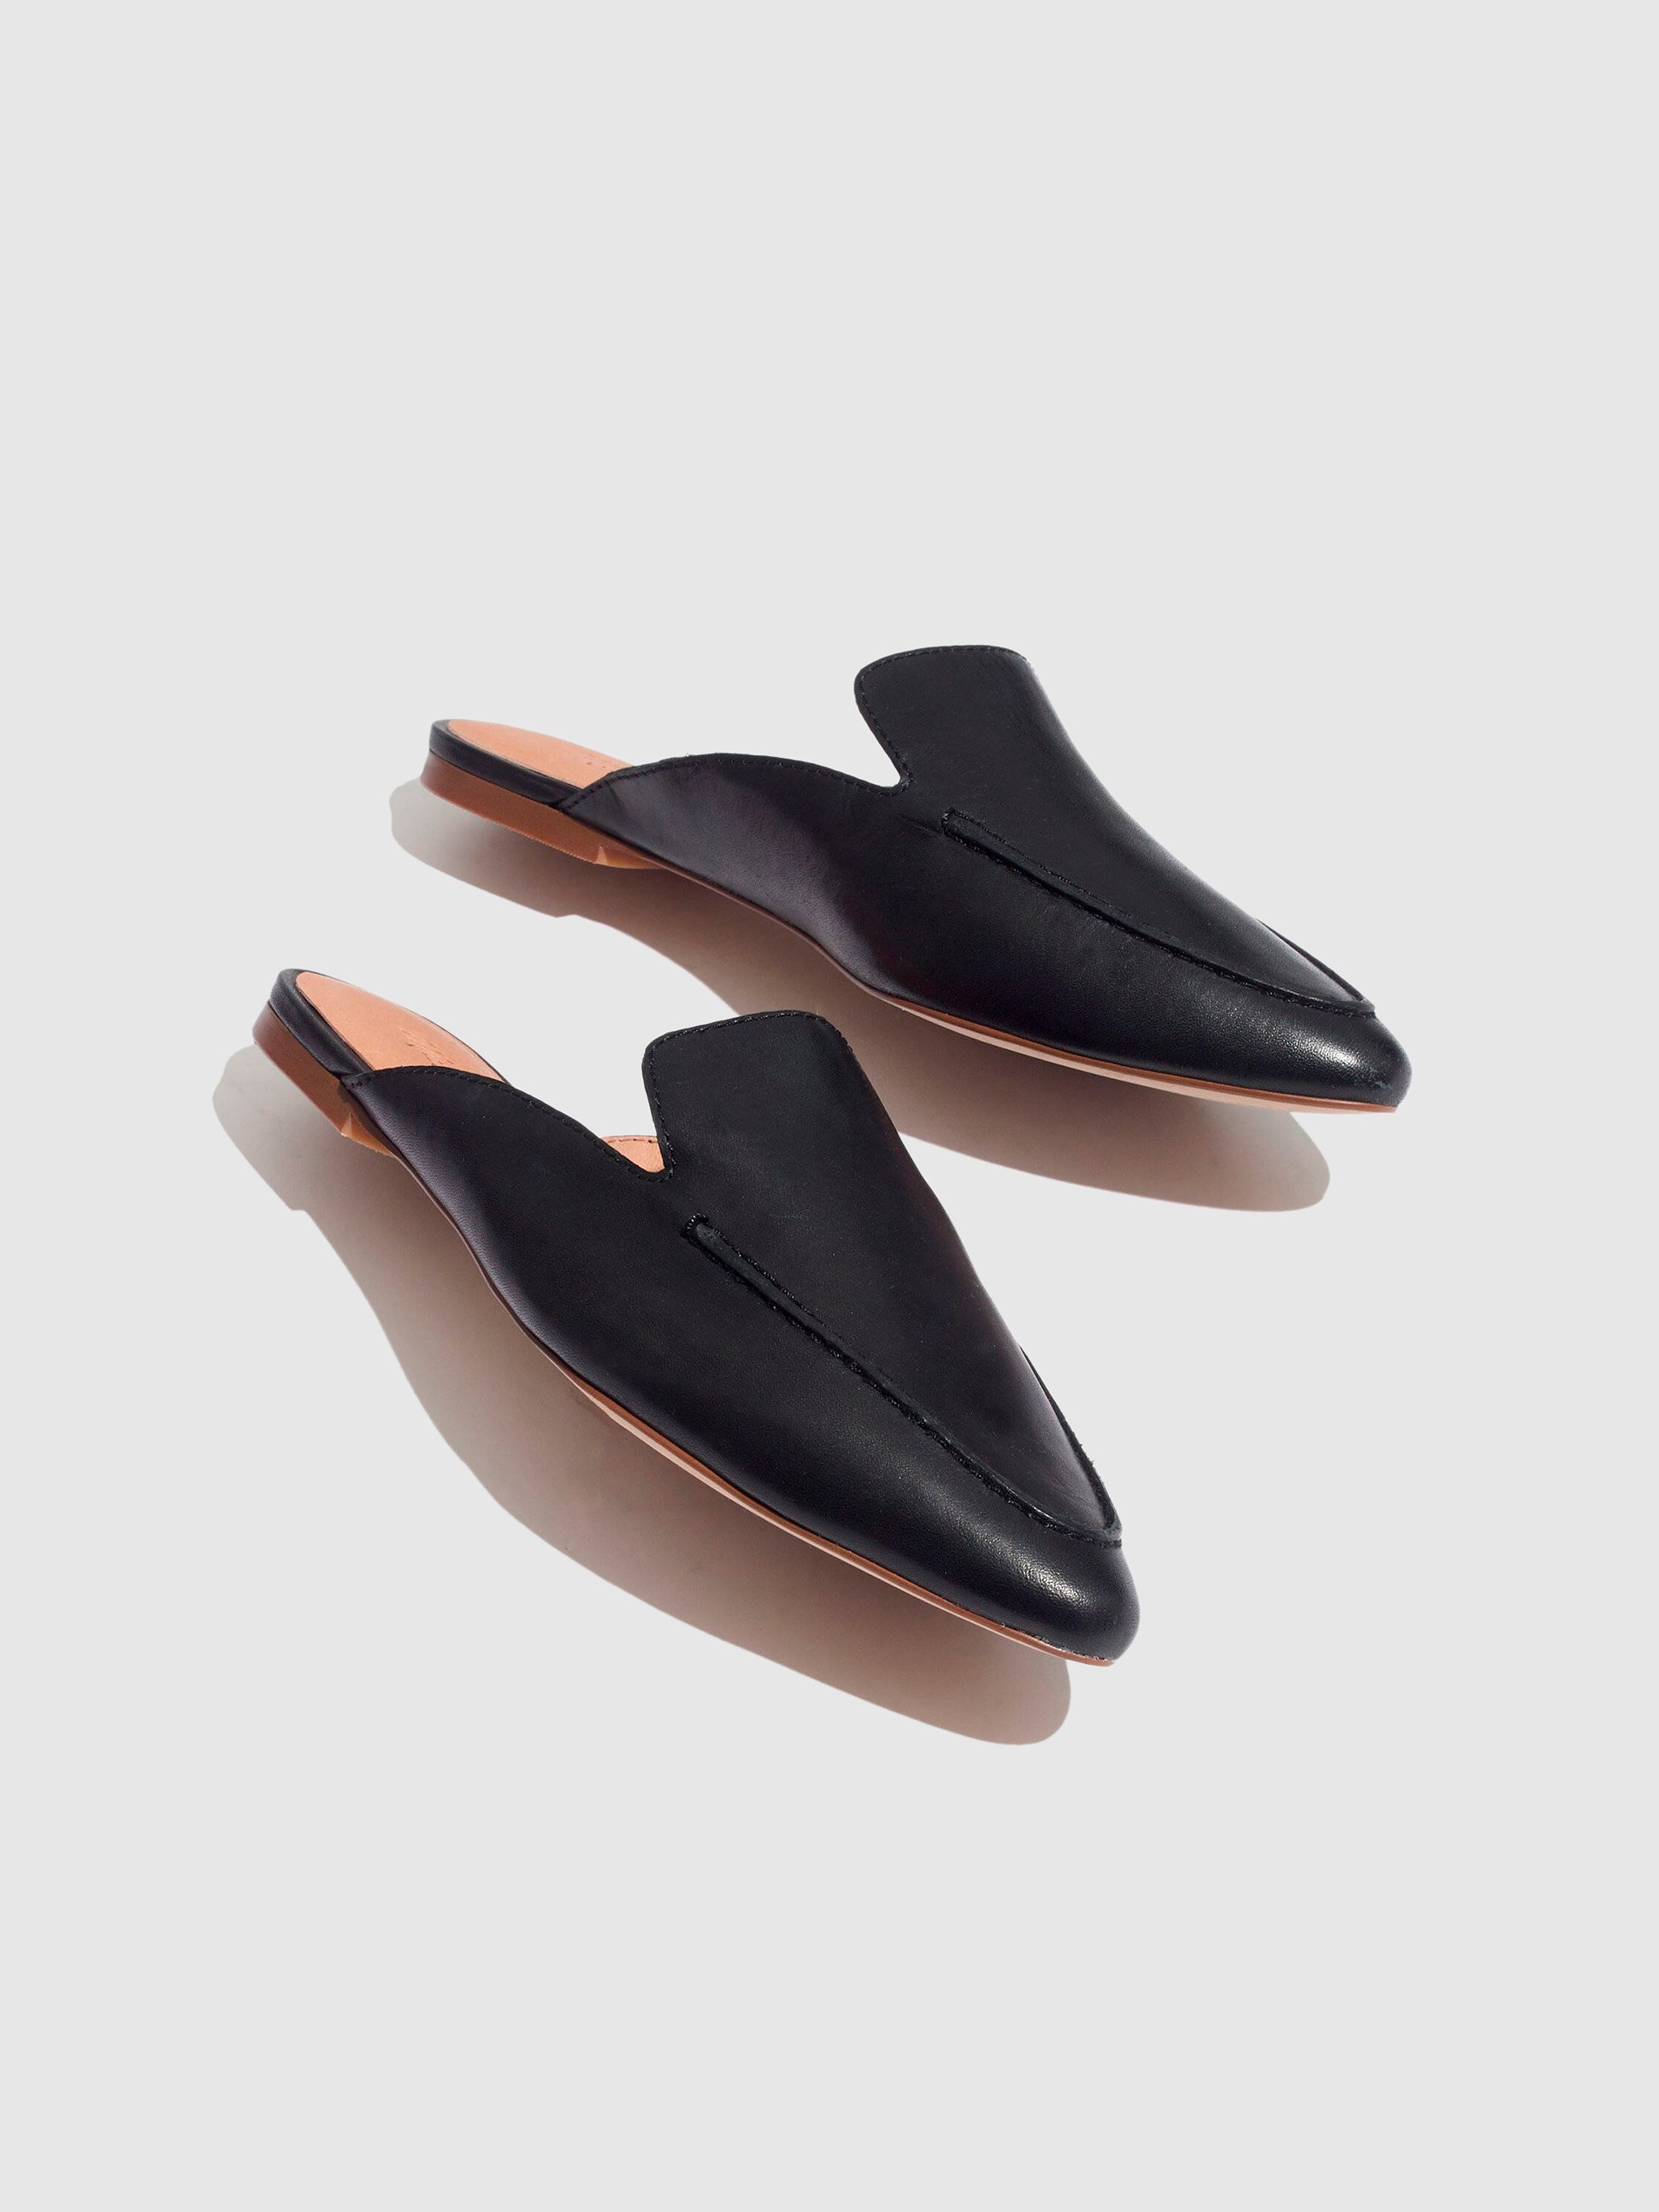 madewell frances mules